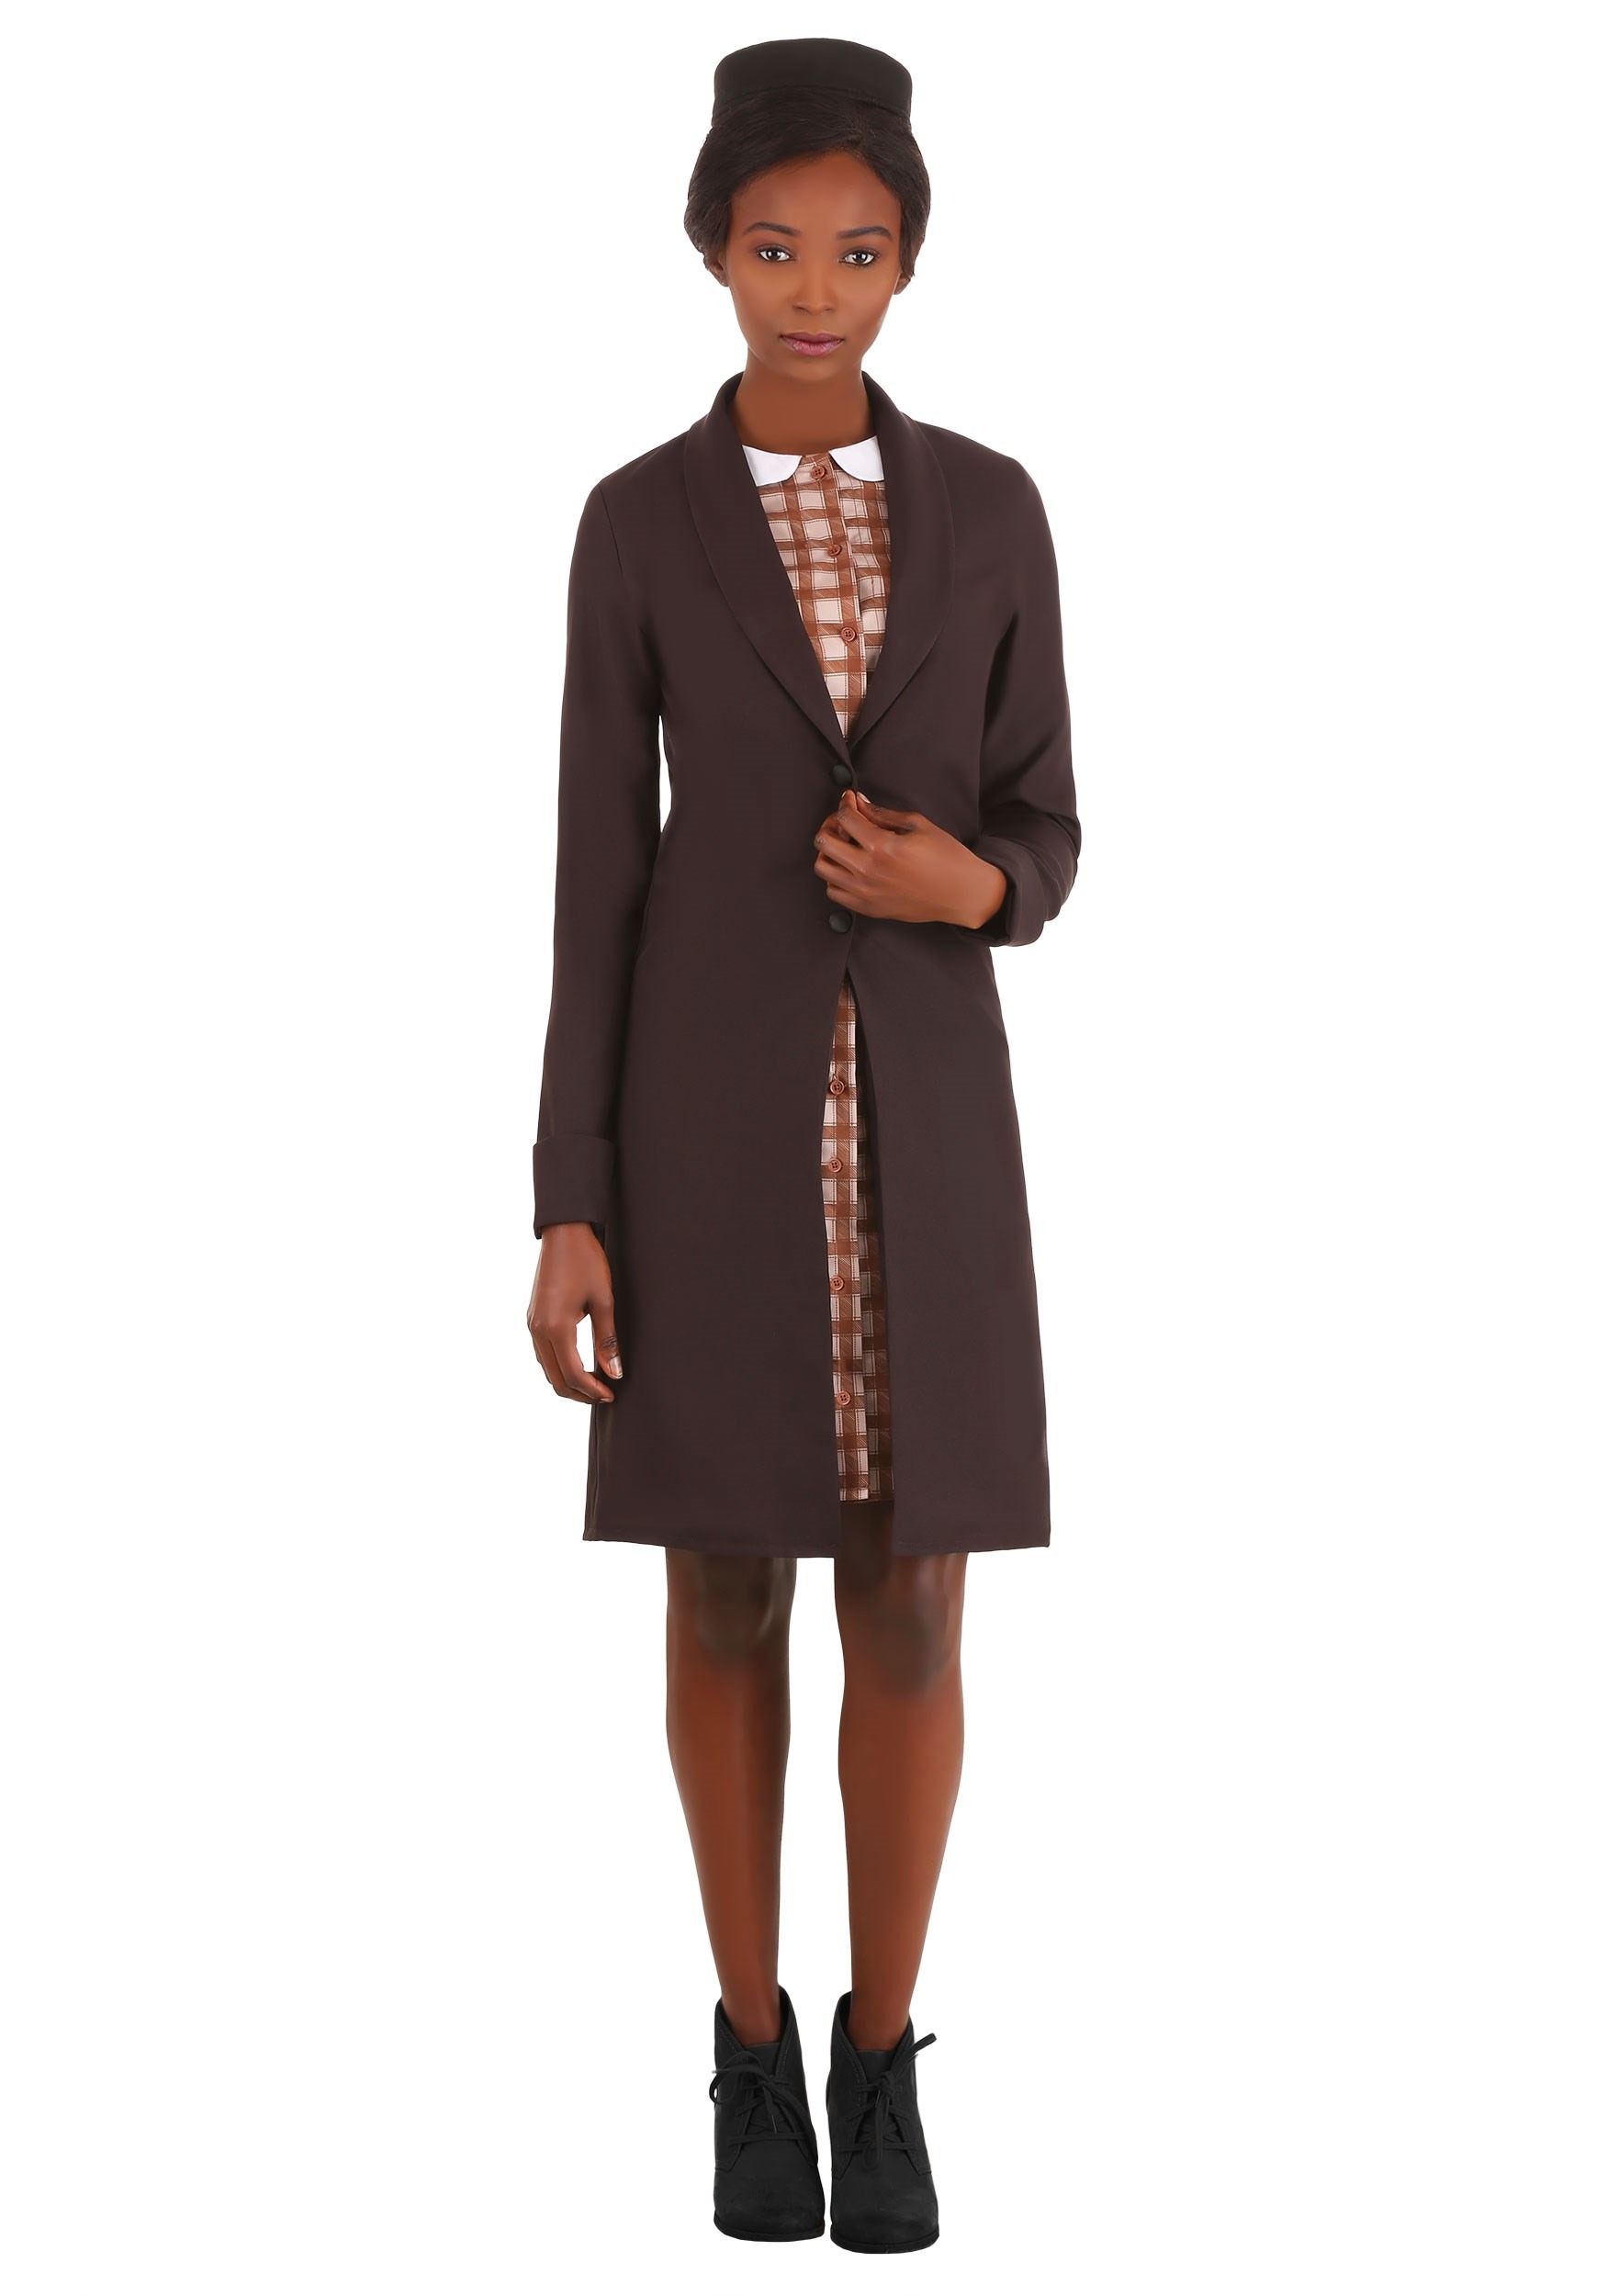 Rosa Parks Womens Costume